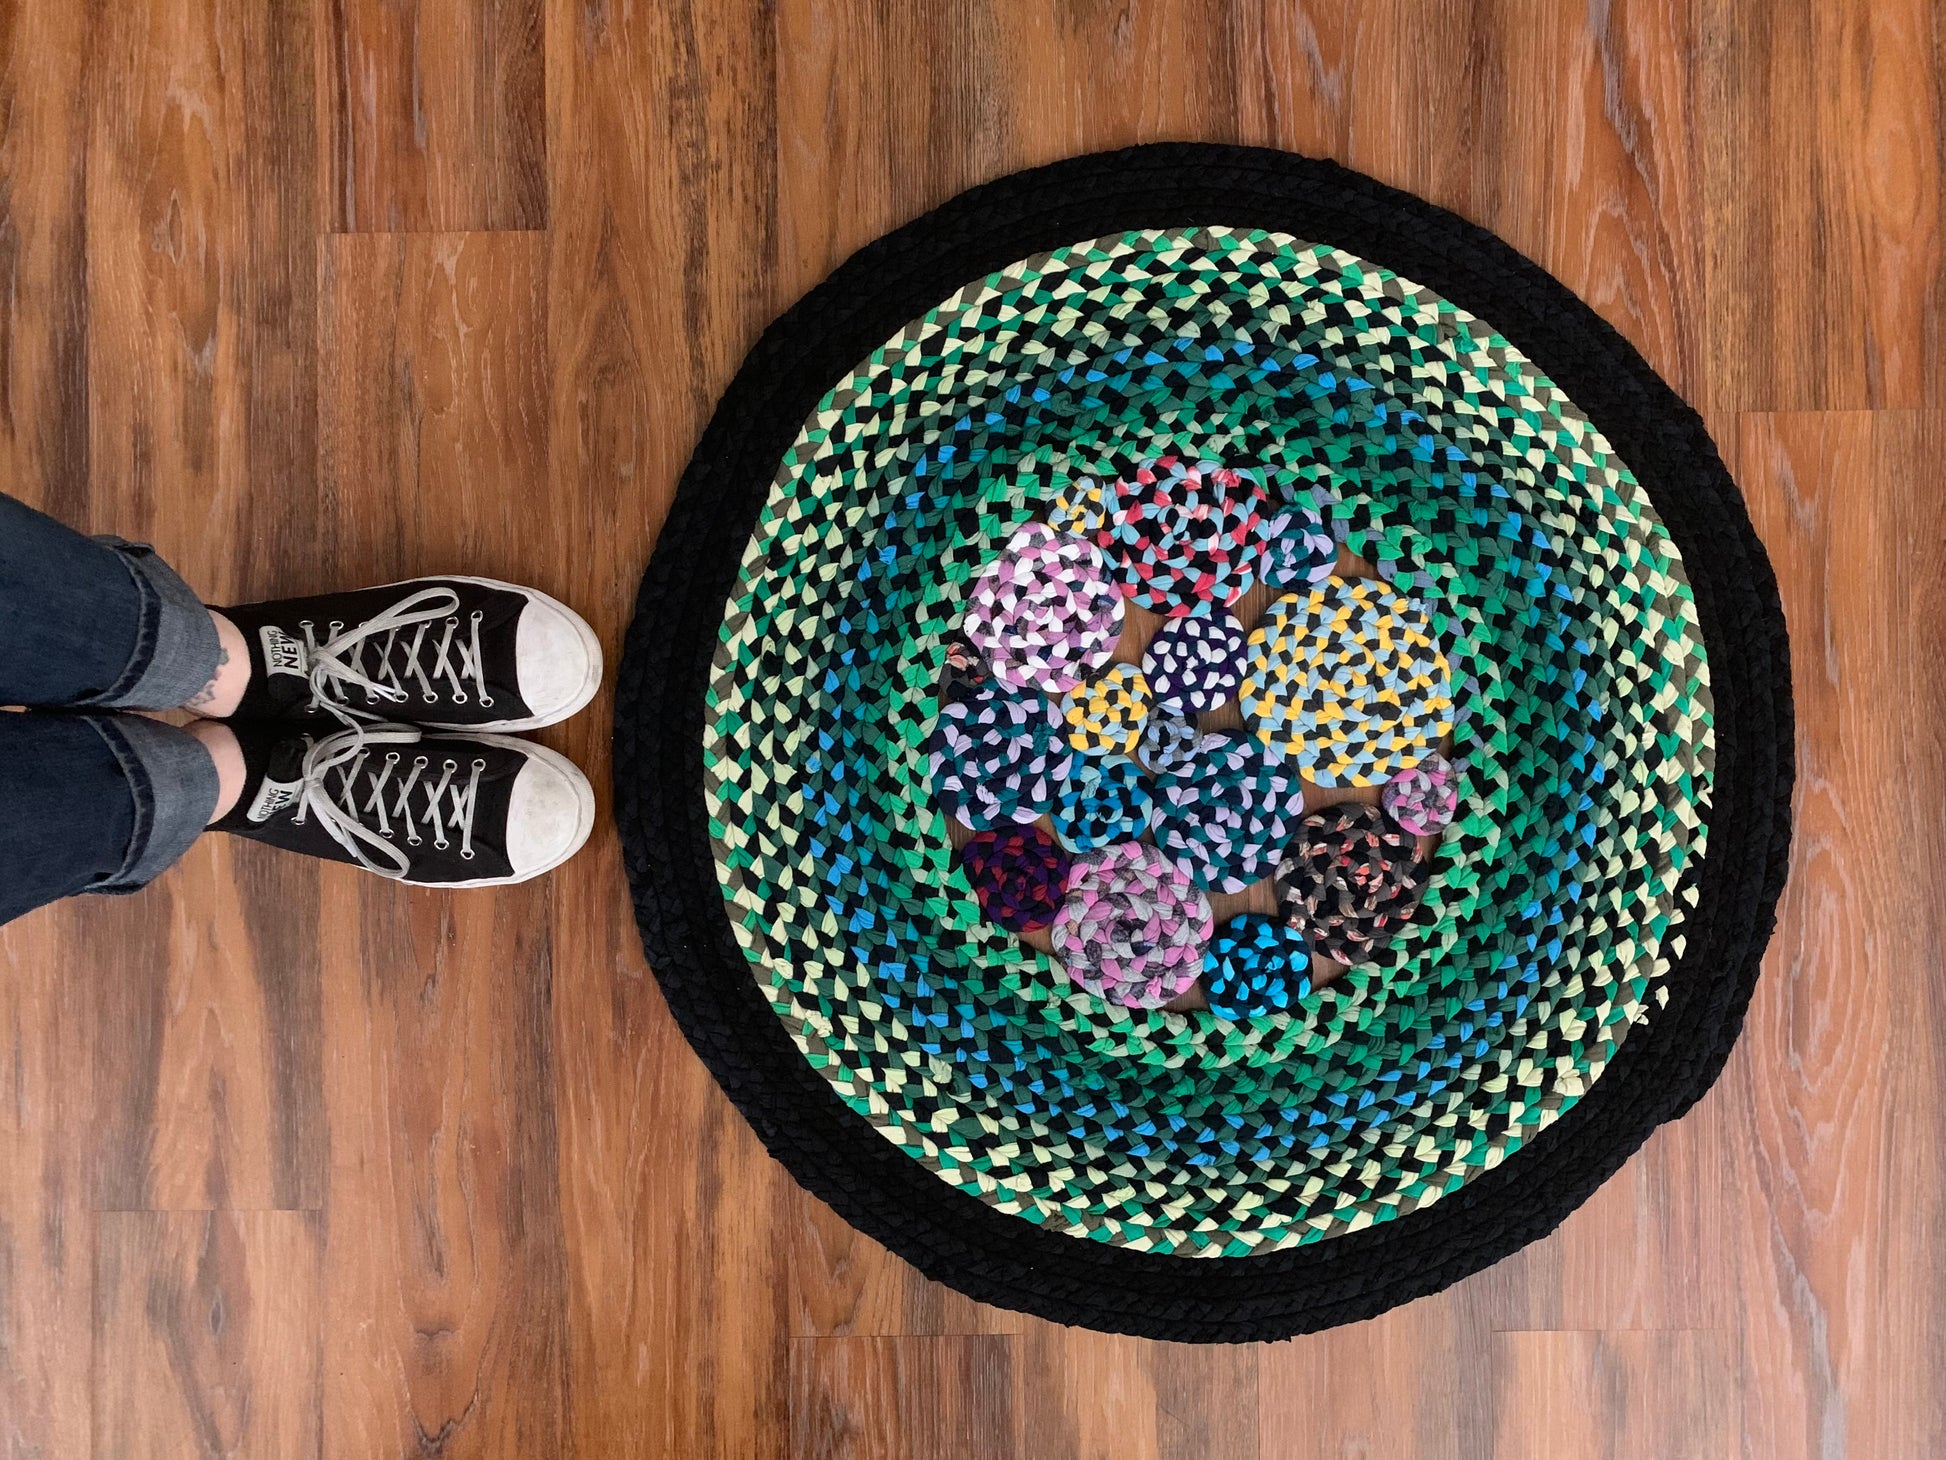 aerial view of green garden rug, with feet nearby wearing Nothing New shoes for scale